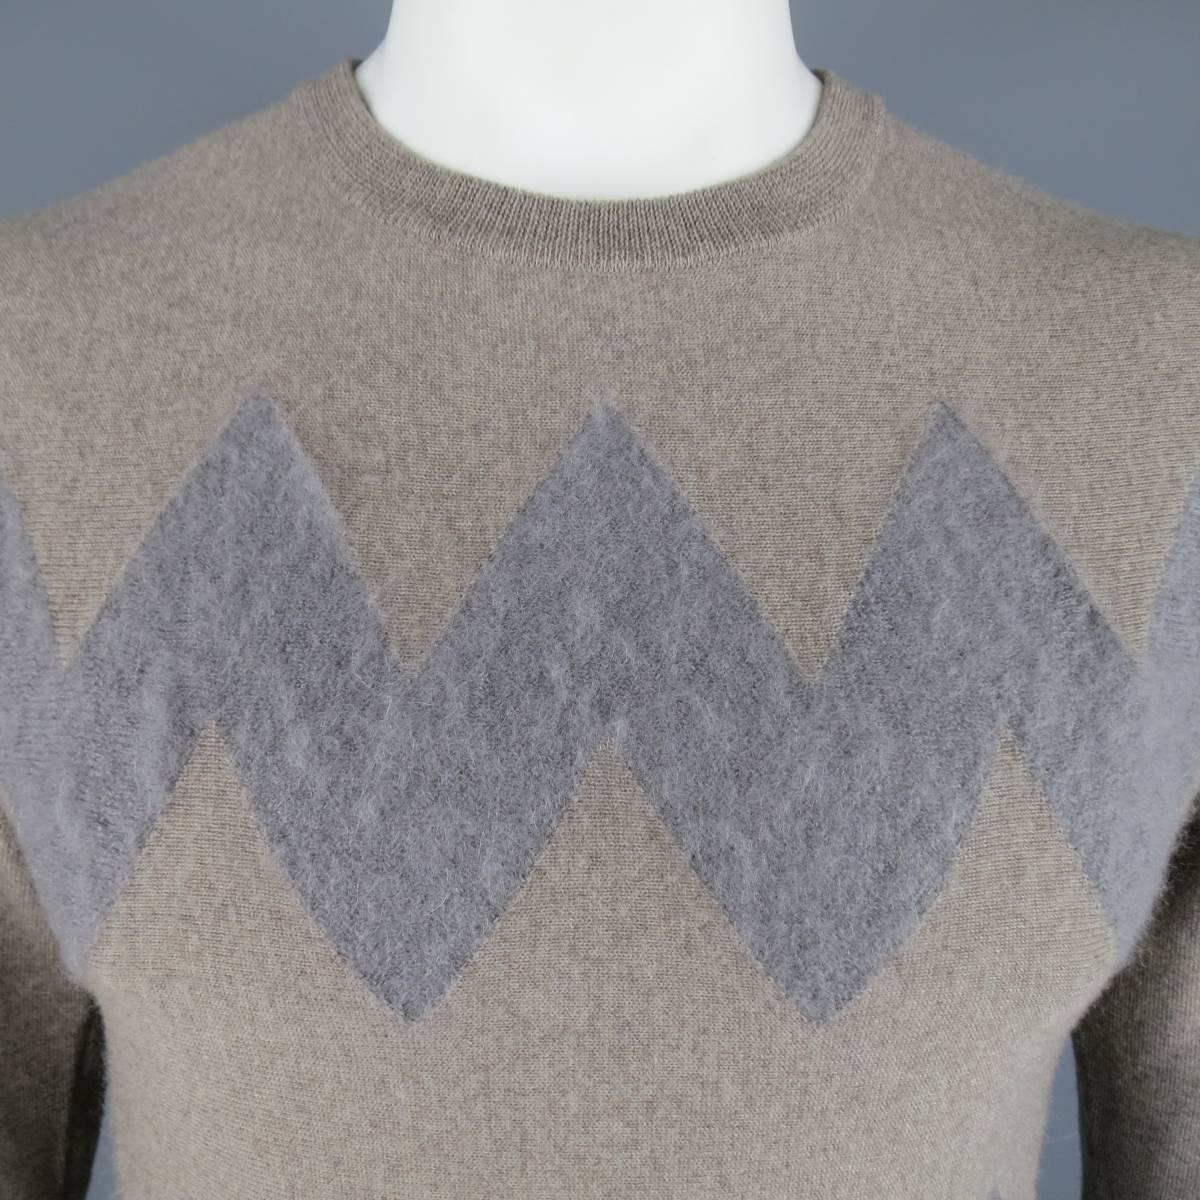 VIKTOR & ROLF Sweater consists of wool/mohair material in a taupe color tone. Designed in a crew-neck collar, zig-zag front pattern with mohair detail in grey and brown. Made in Italy.
 
Excellent Pre-Owned Condition
Marked Size: M
 
Measurements
